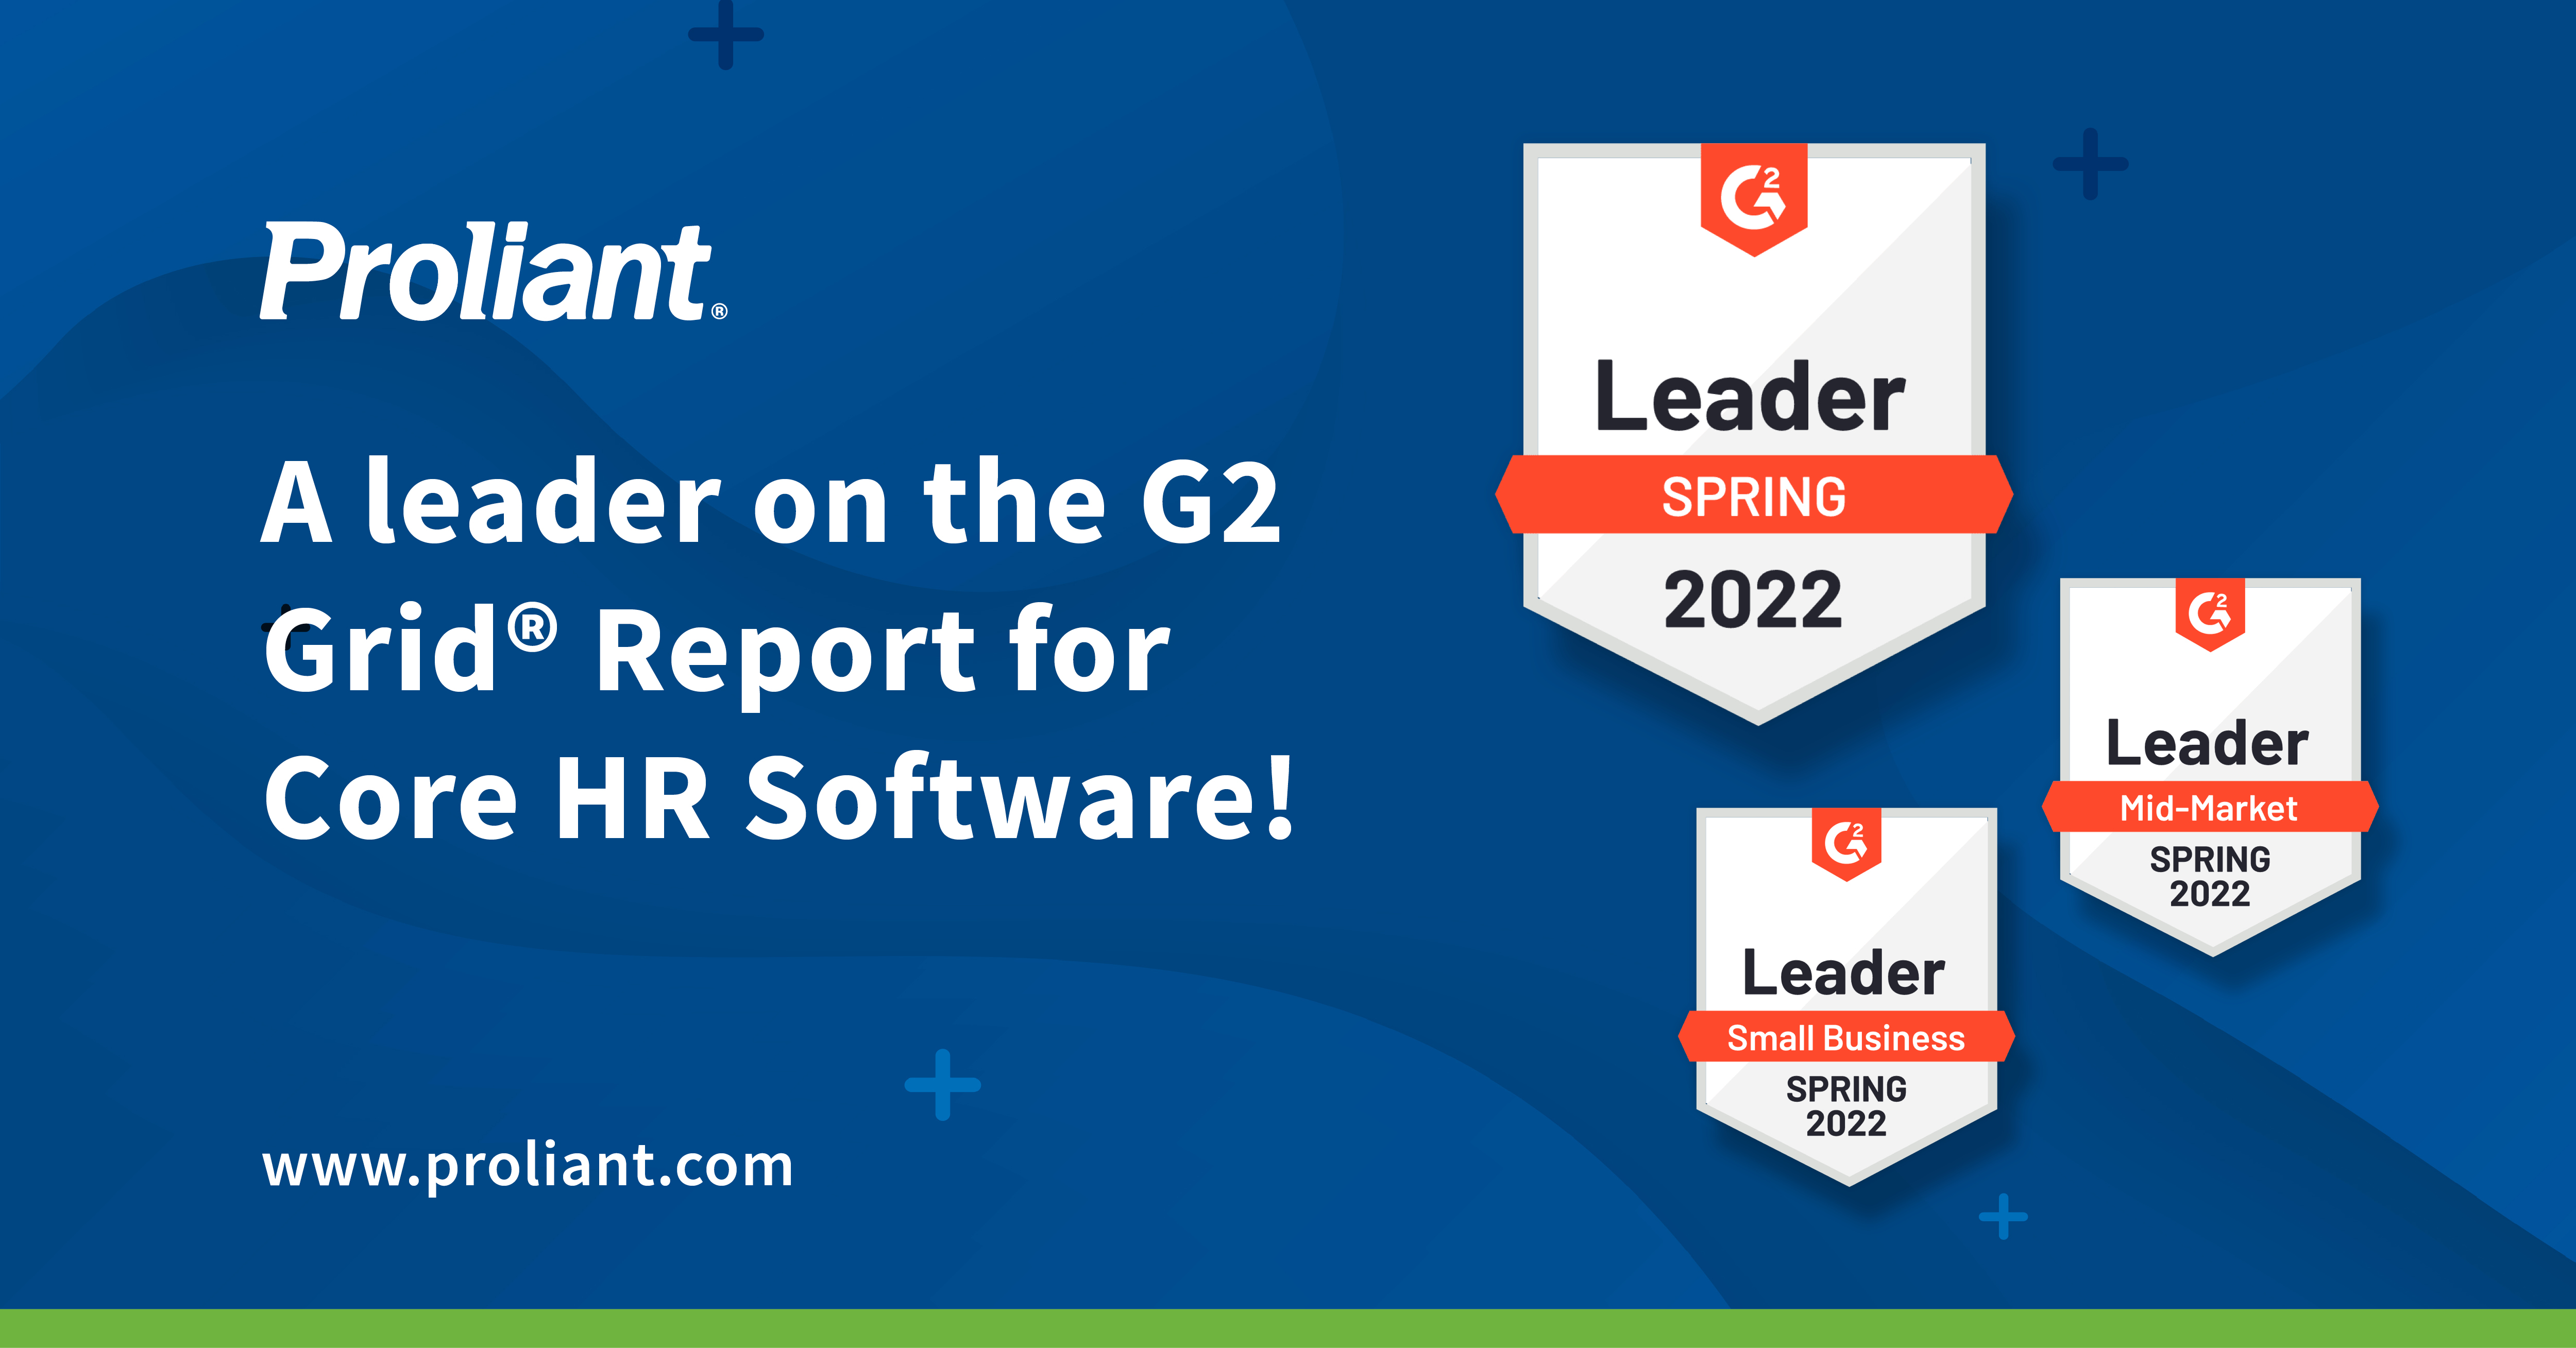 Proliant is a Leader on the G2 Spring Grid Report for Core HR [Including Mid-Market and Small Business]